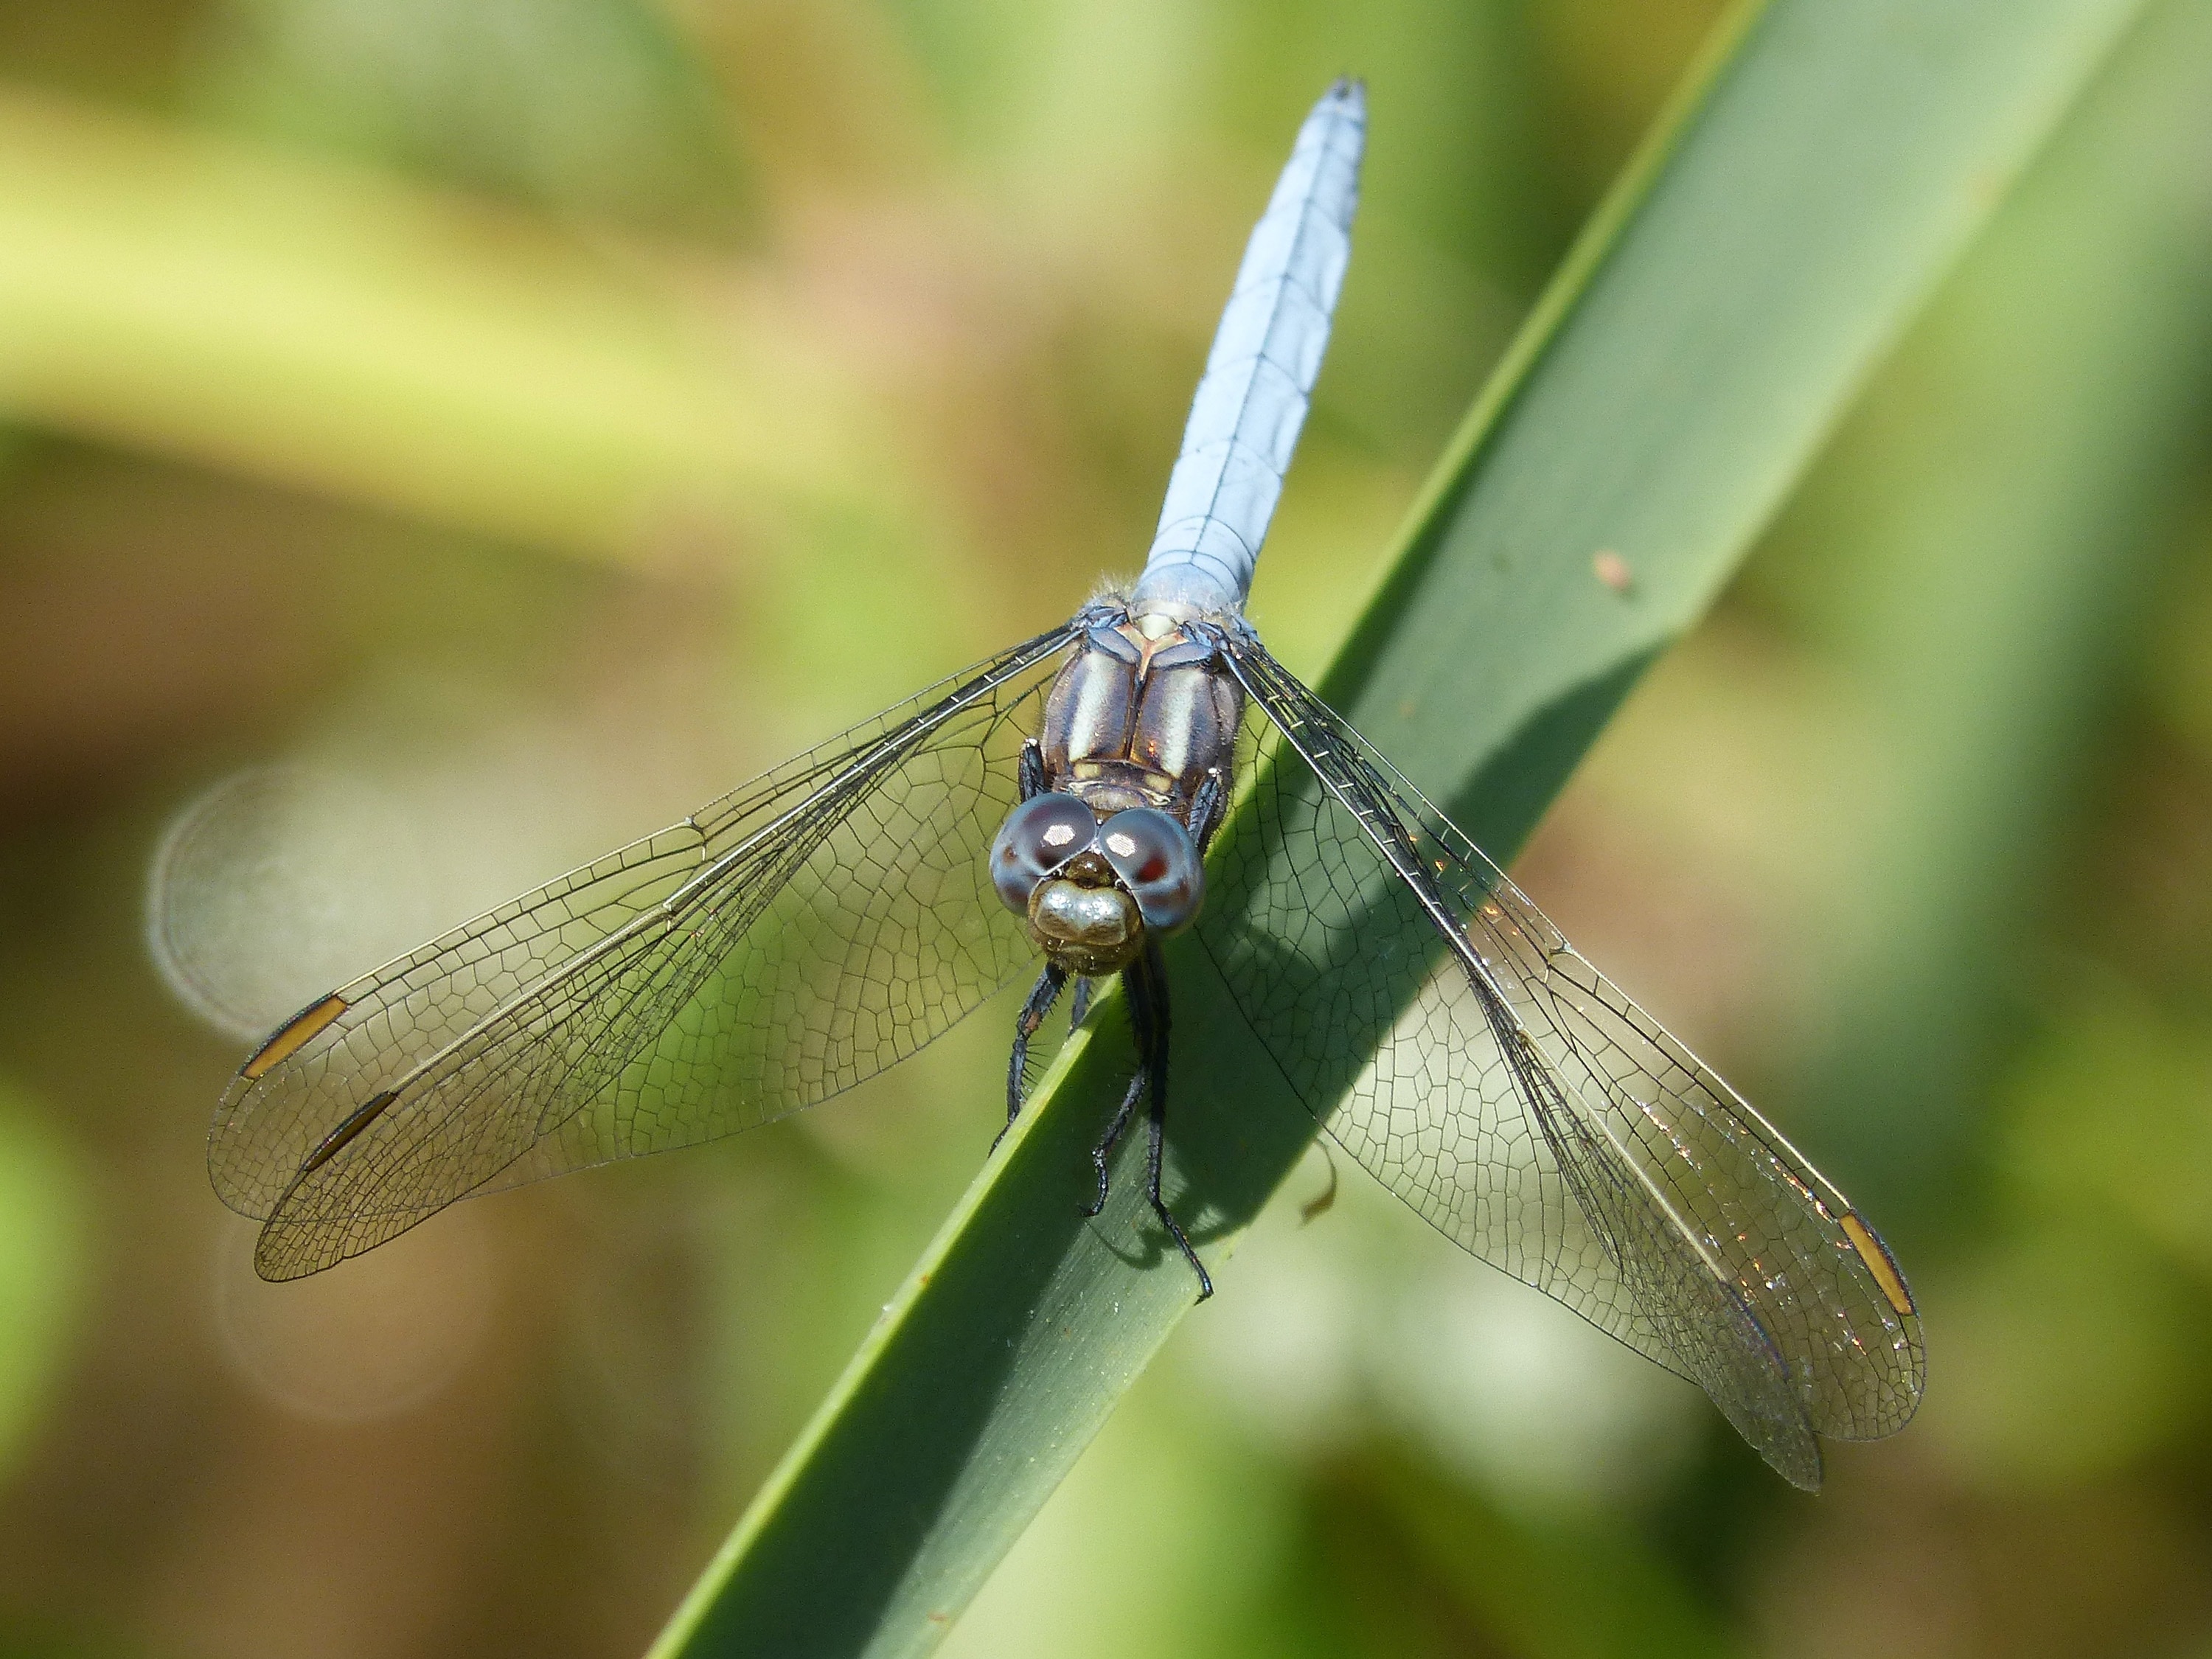 Blue Eyed skimmer on green leaf in closeup photography